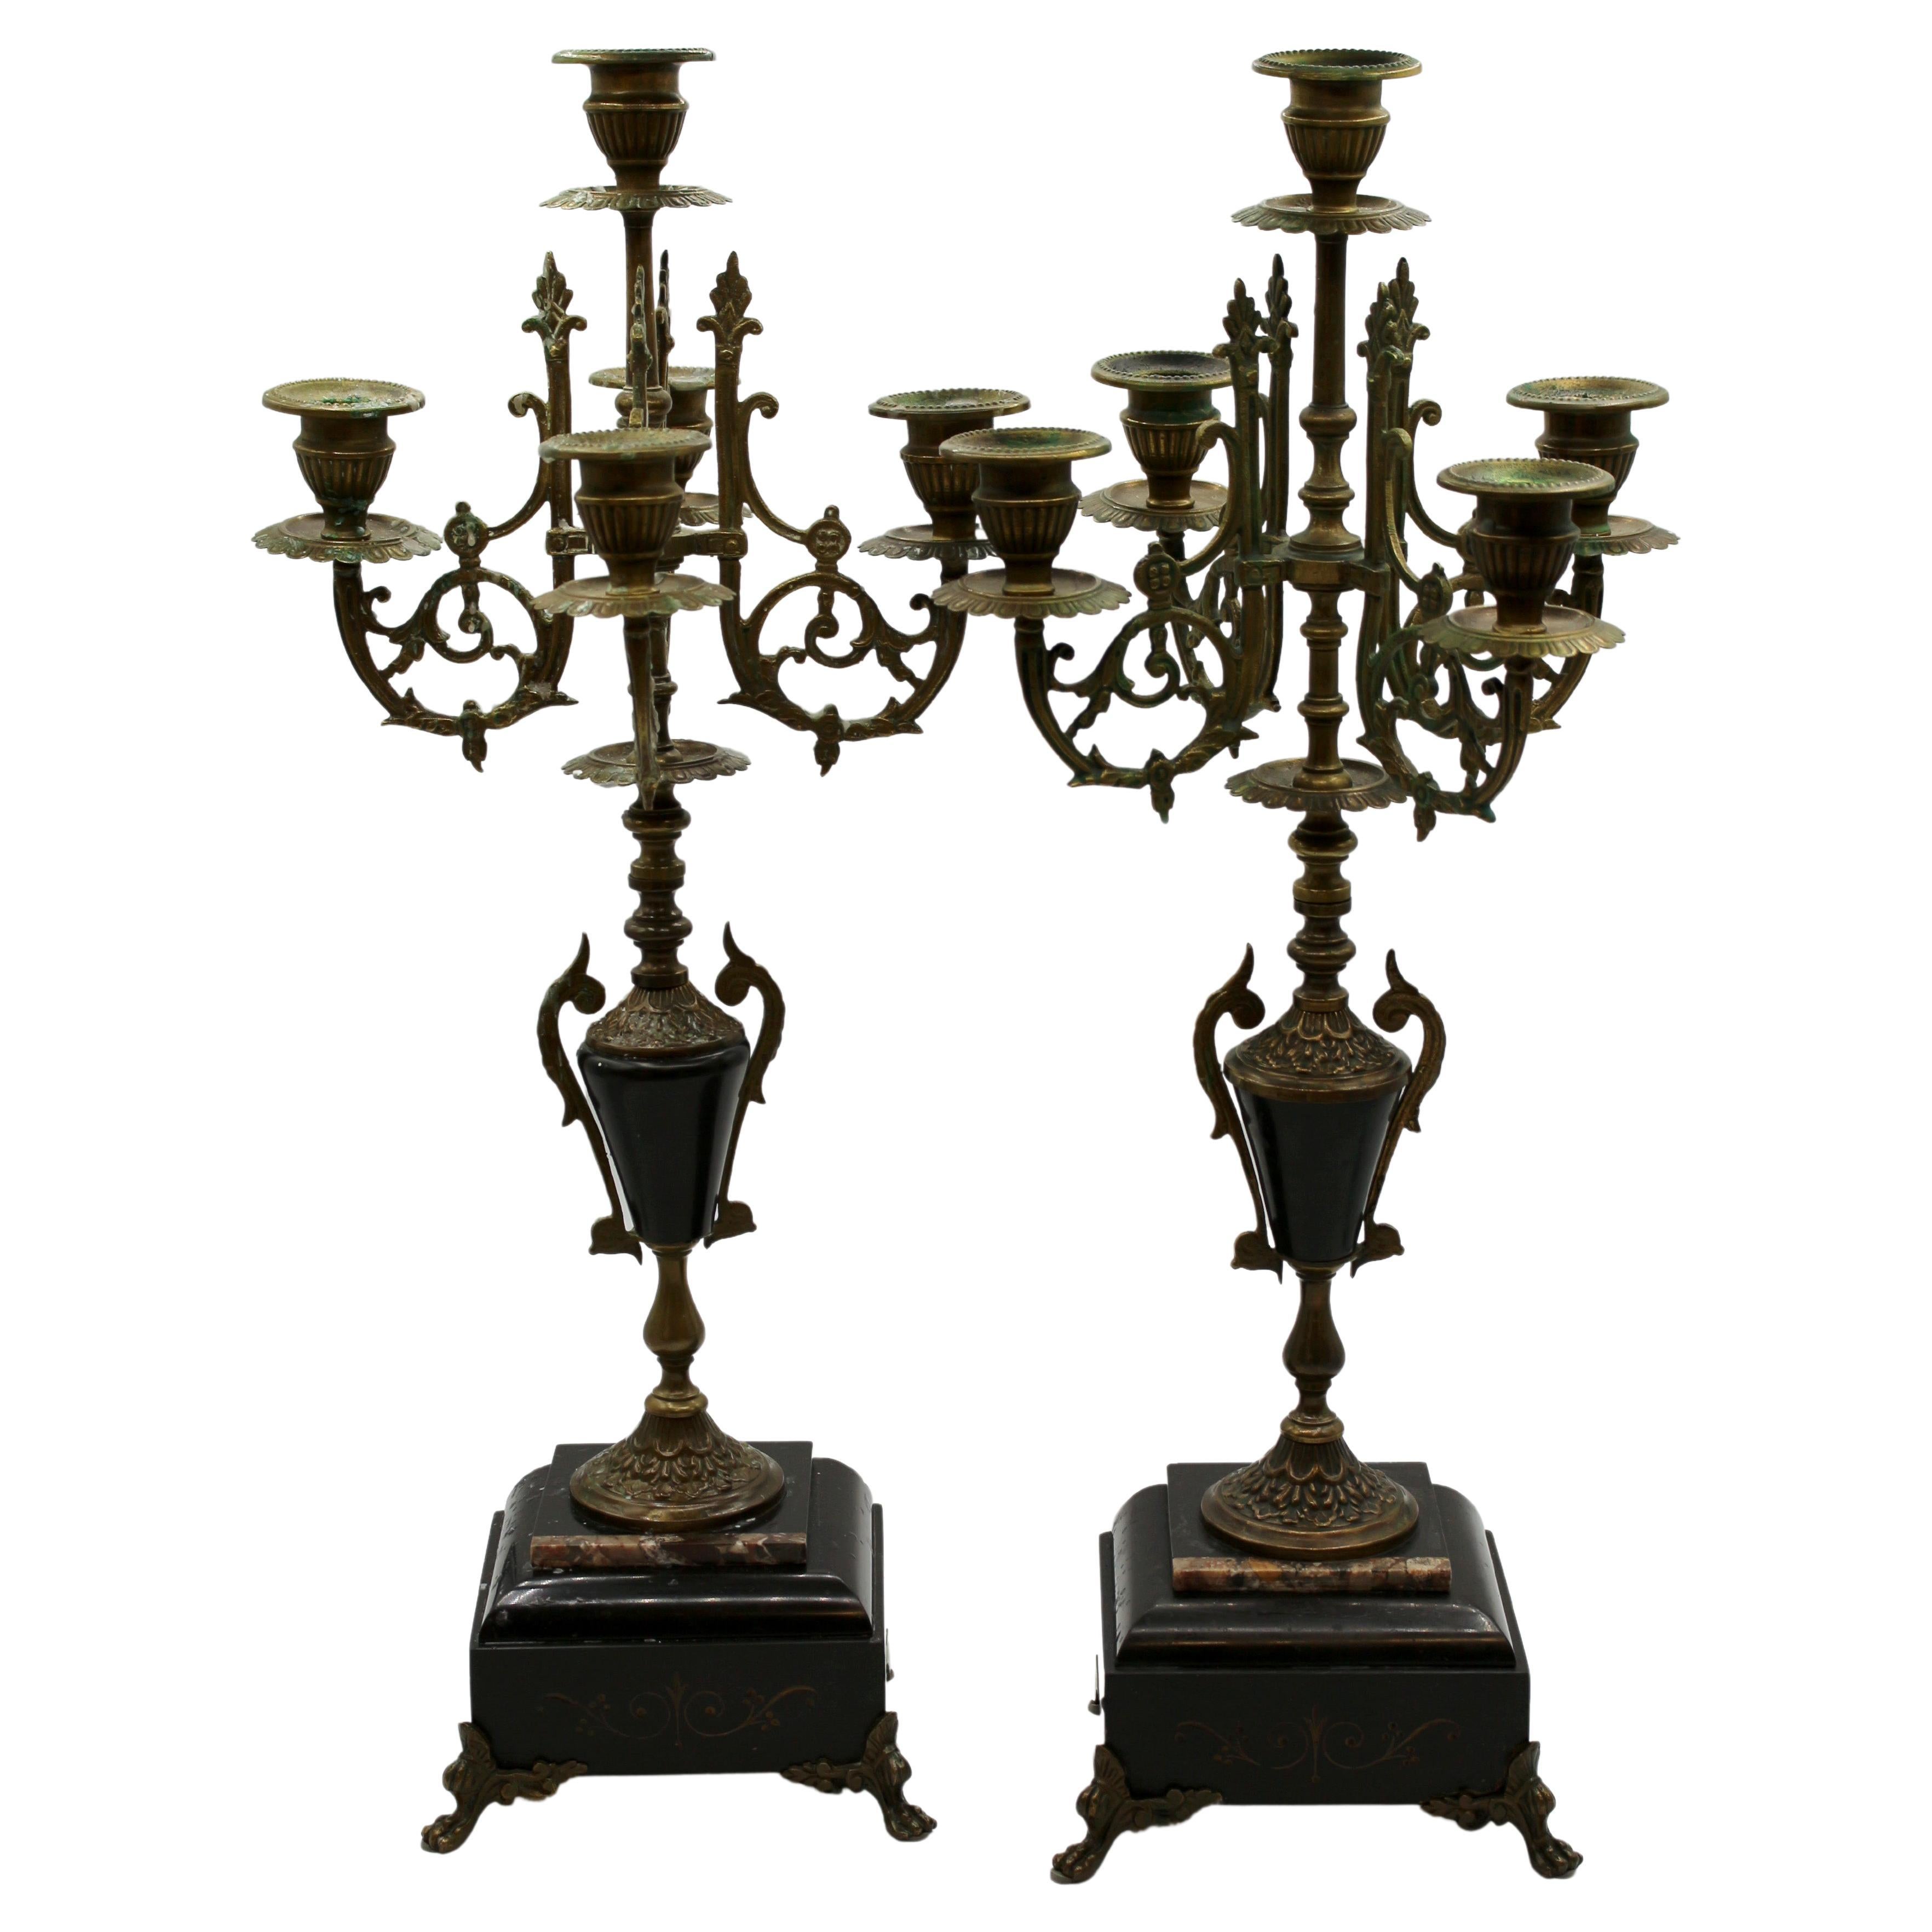 Circa 1870s Pair of Black Slate and Brass Candelabras